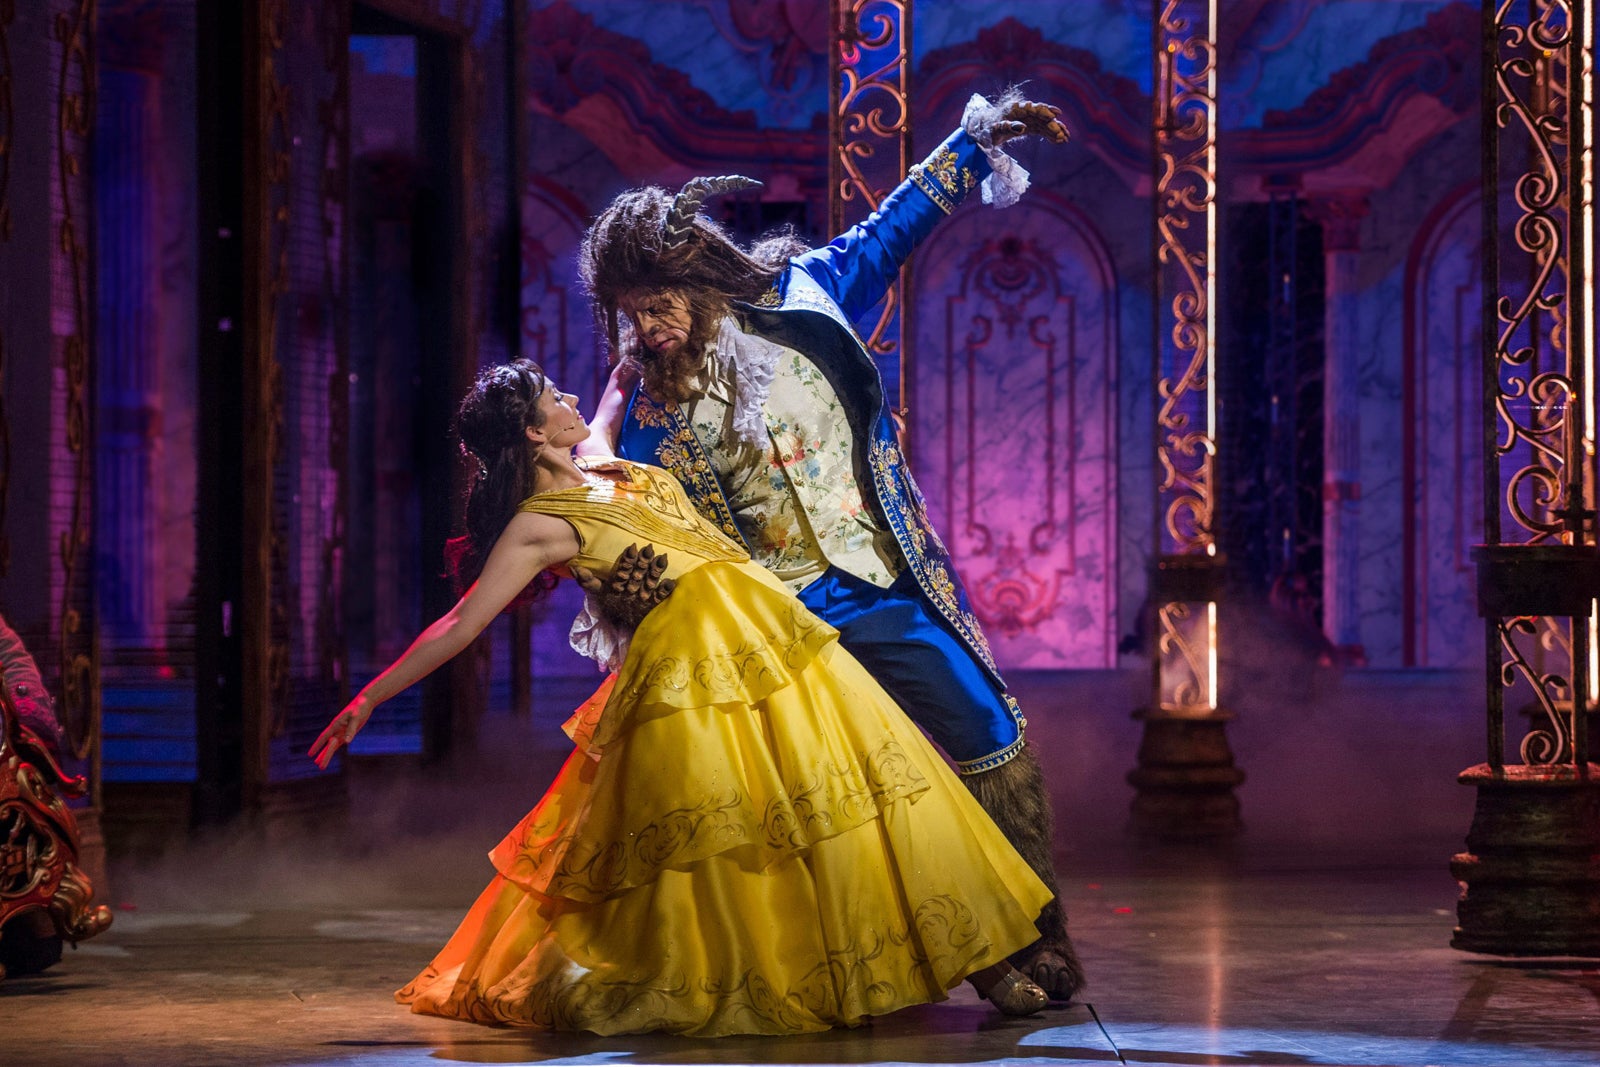 Cast perform dance number in “Beauty and the Beast” musical.